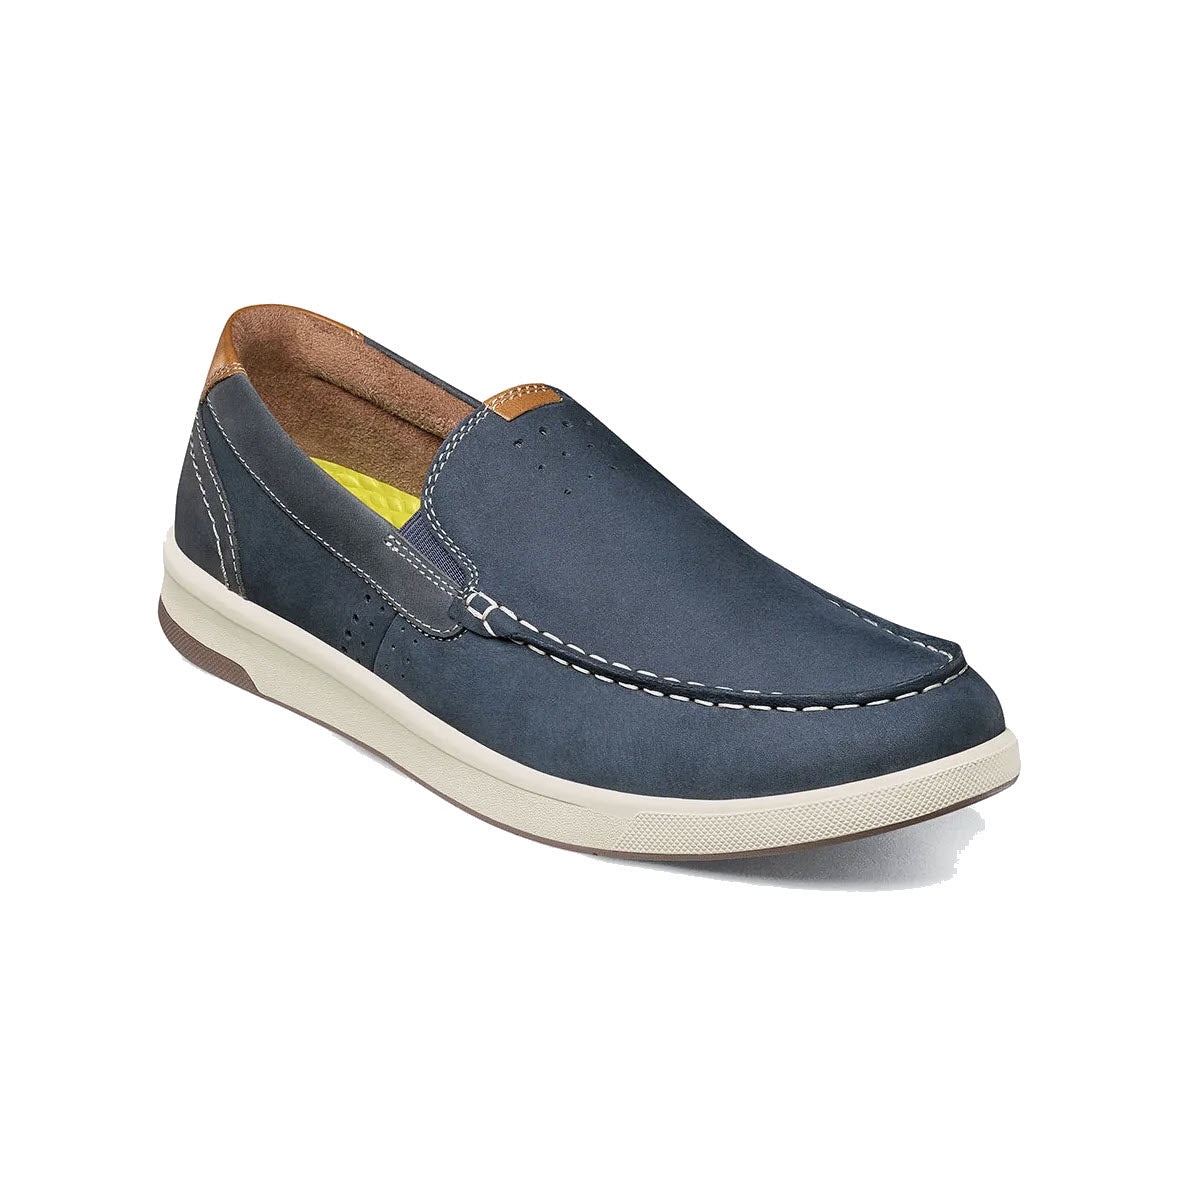 Florsheim navy blue slip-on shoe with white soles and yellow interior, featuring side stitching and a Comfortech footbed.